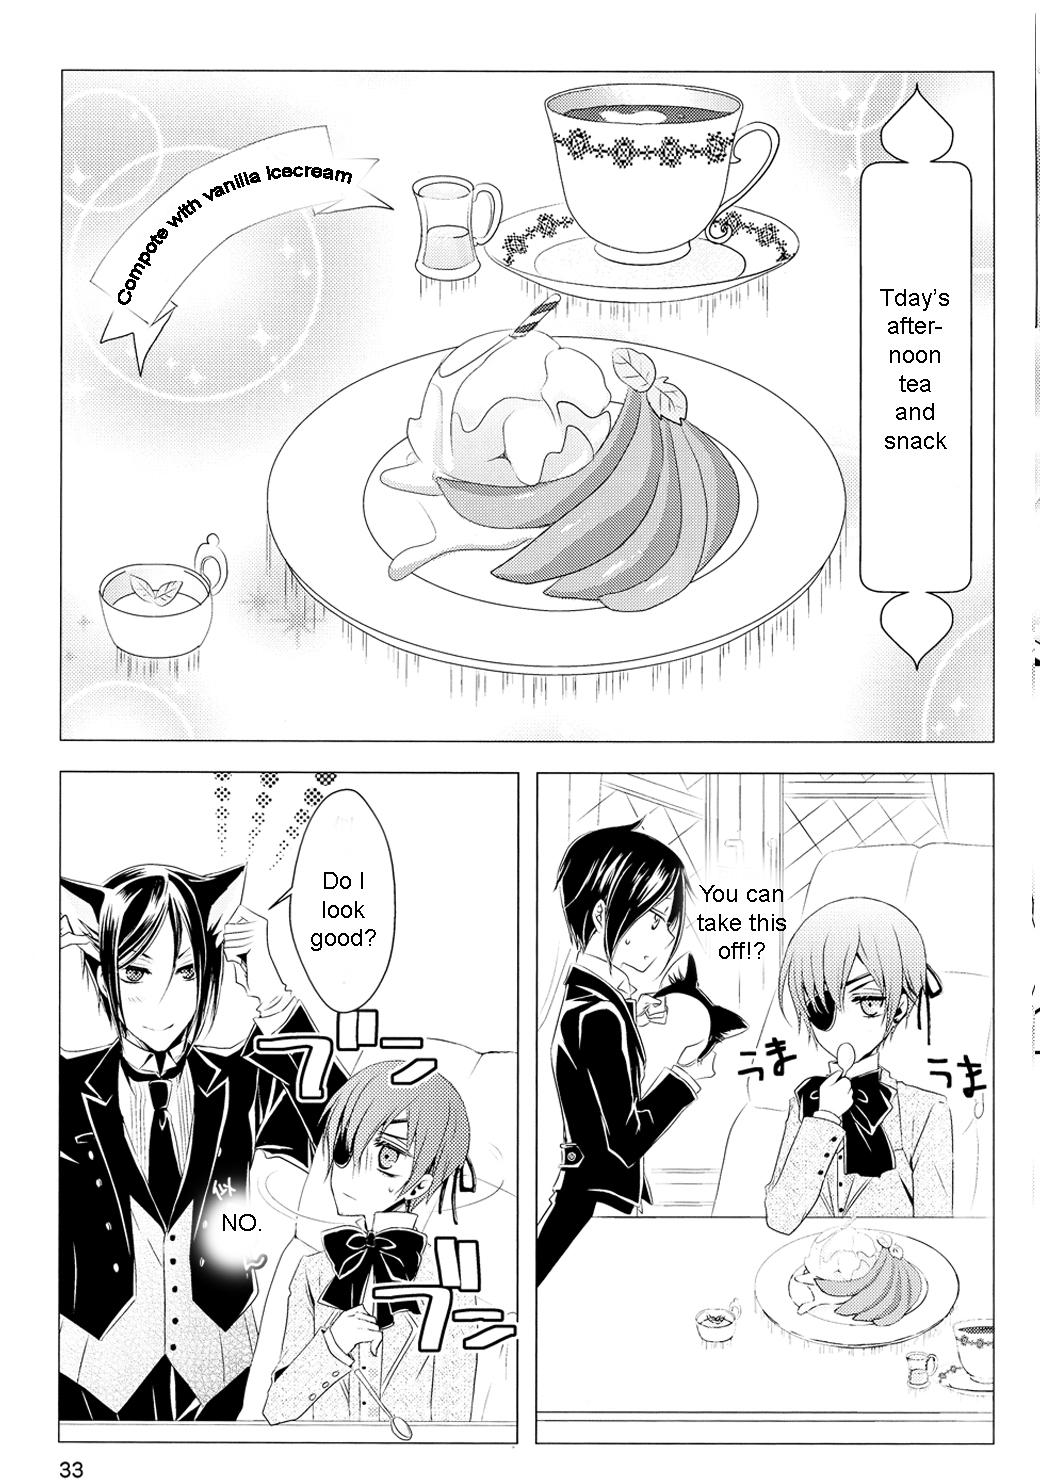 Teenies Shiyounin to Inu - Black butler Delicia - Page 34